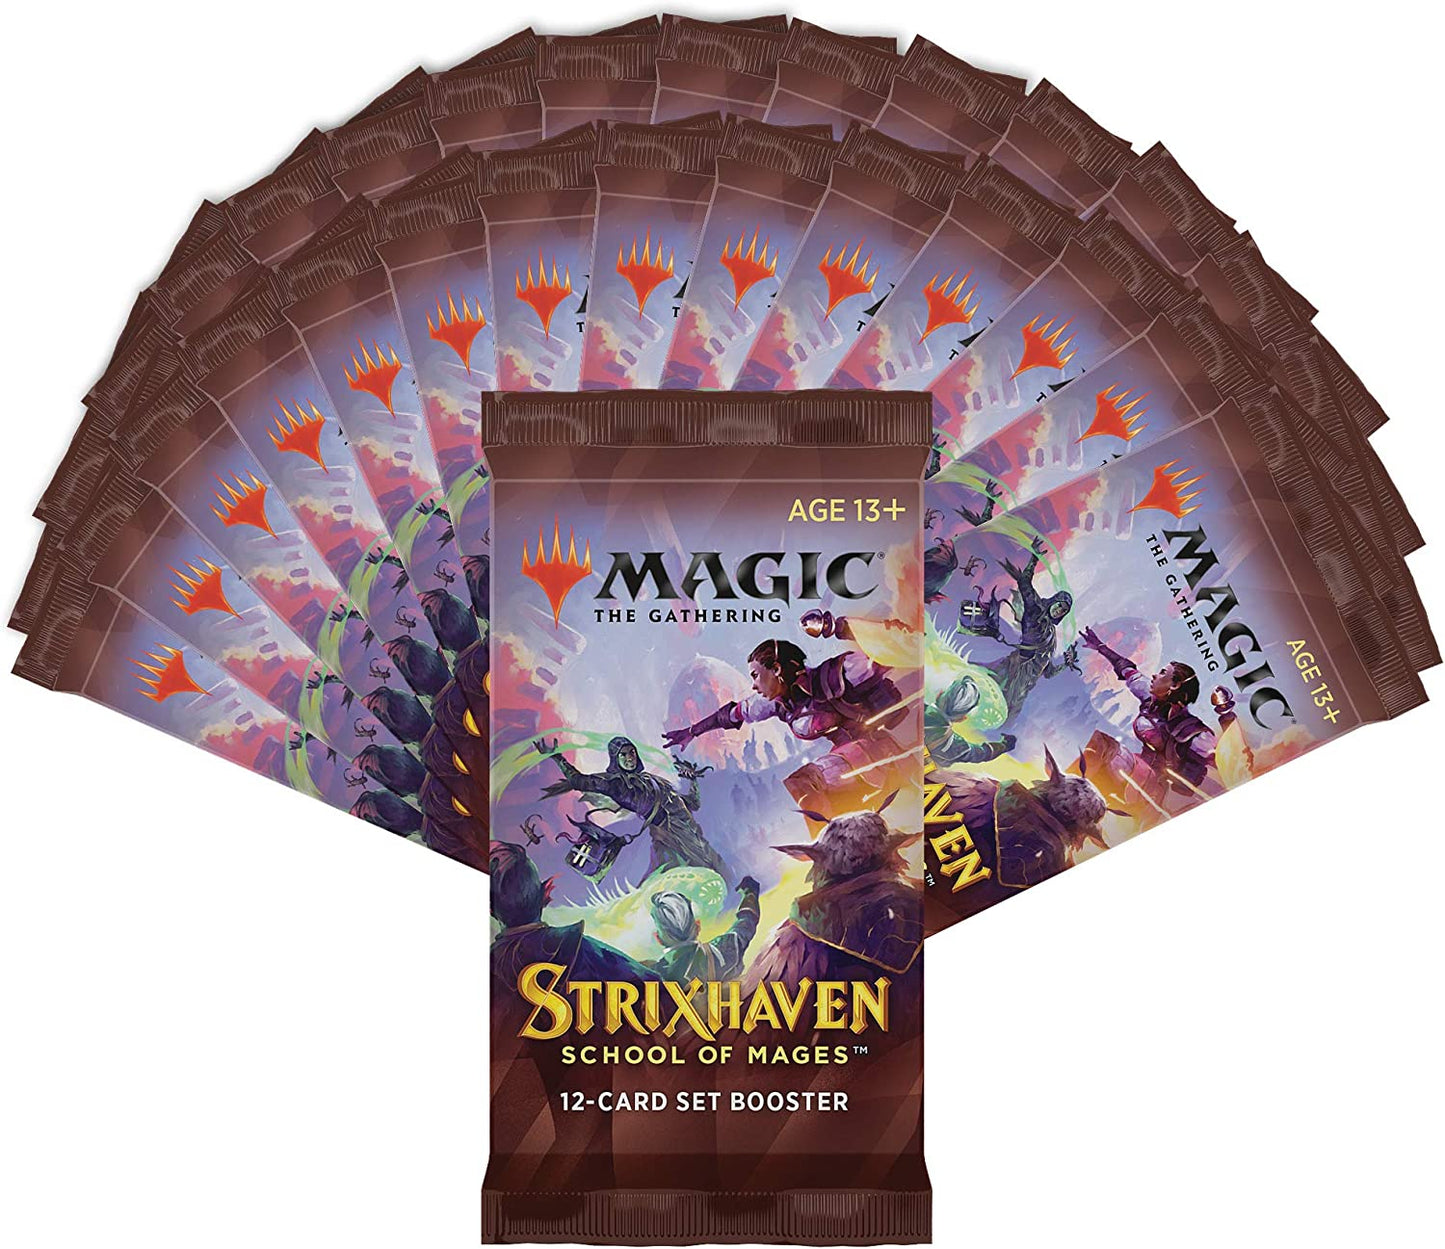 Magic: The Gathering Set Booster Box Case - Strixhaven (Case of 6)